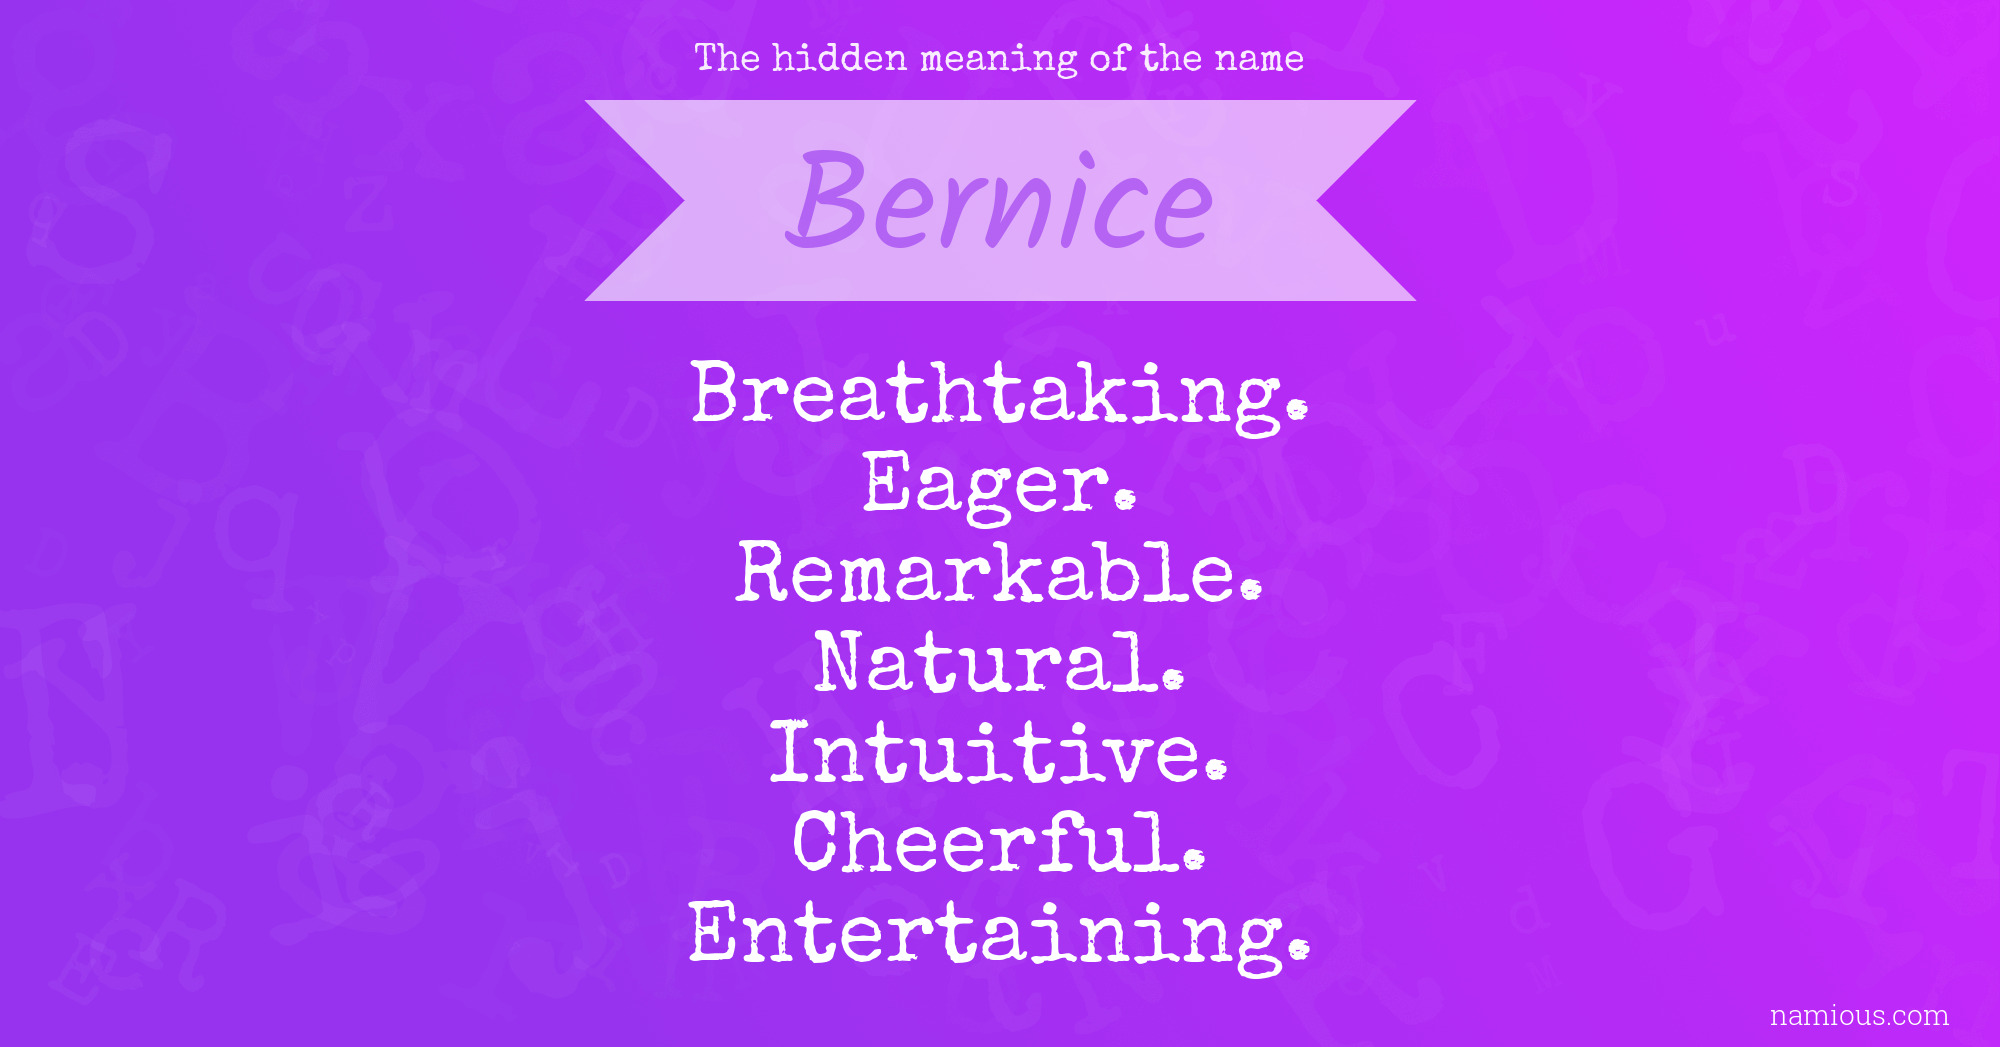 The hidden meaning of the name Bernice